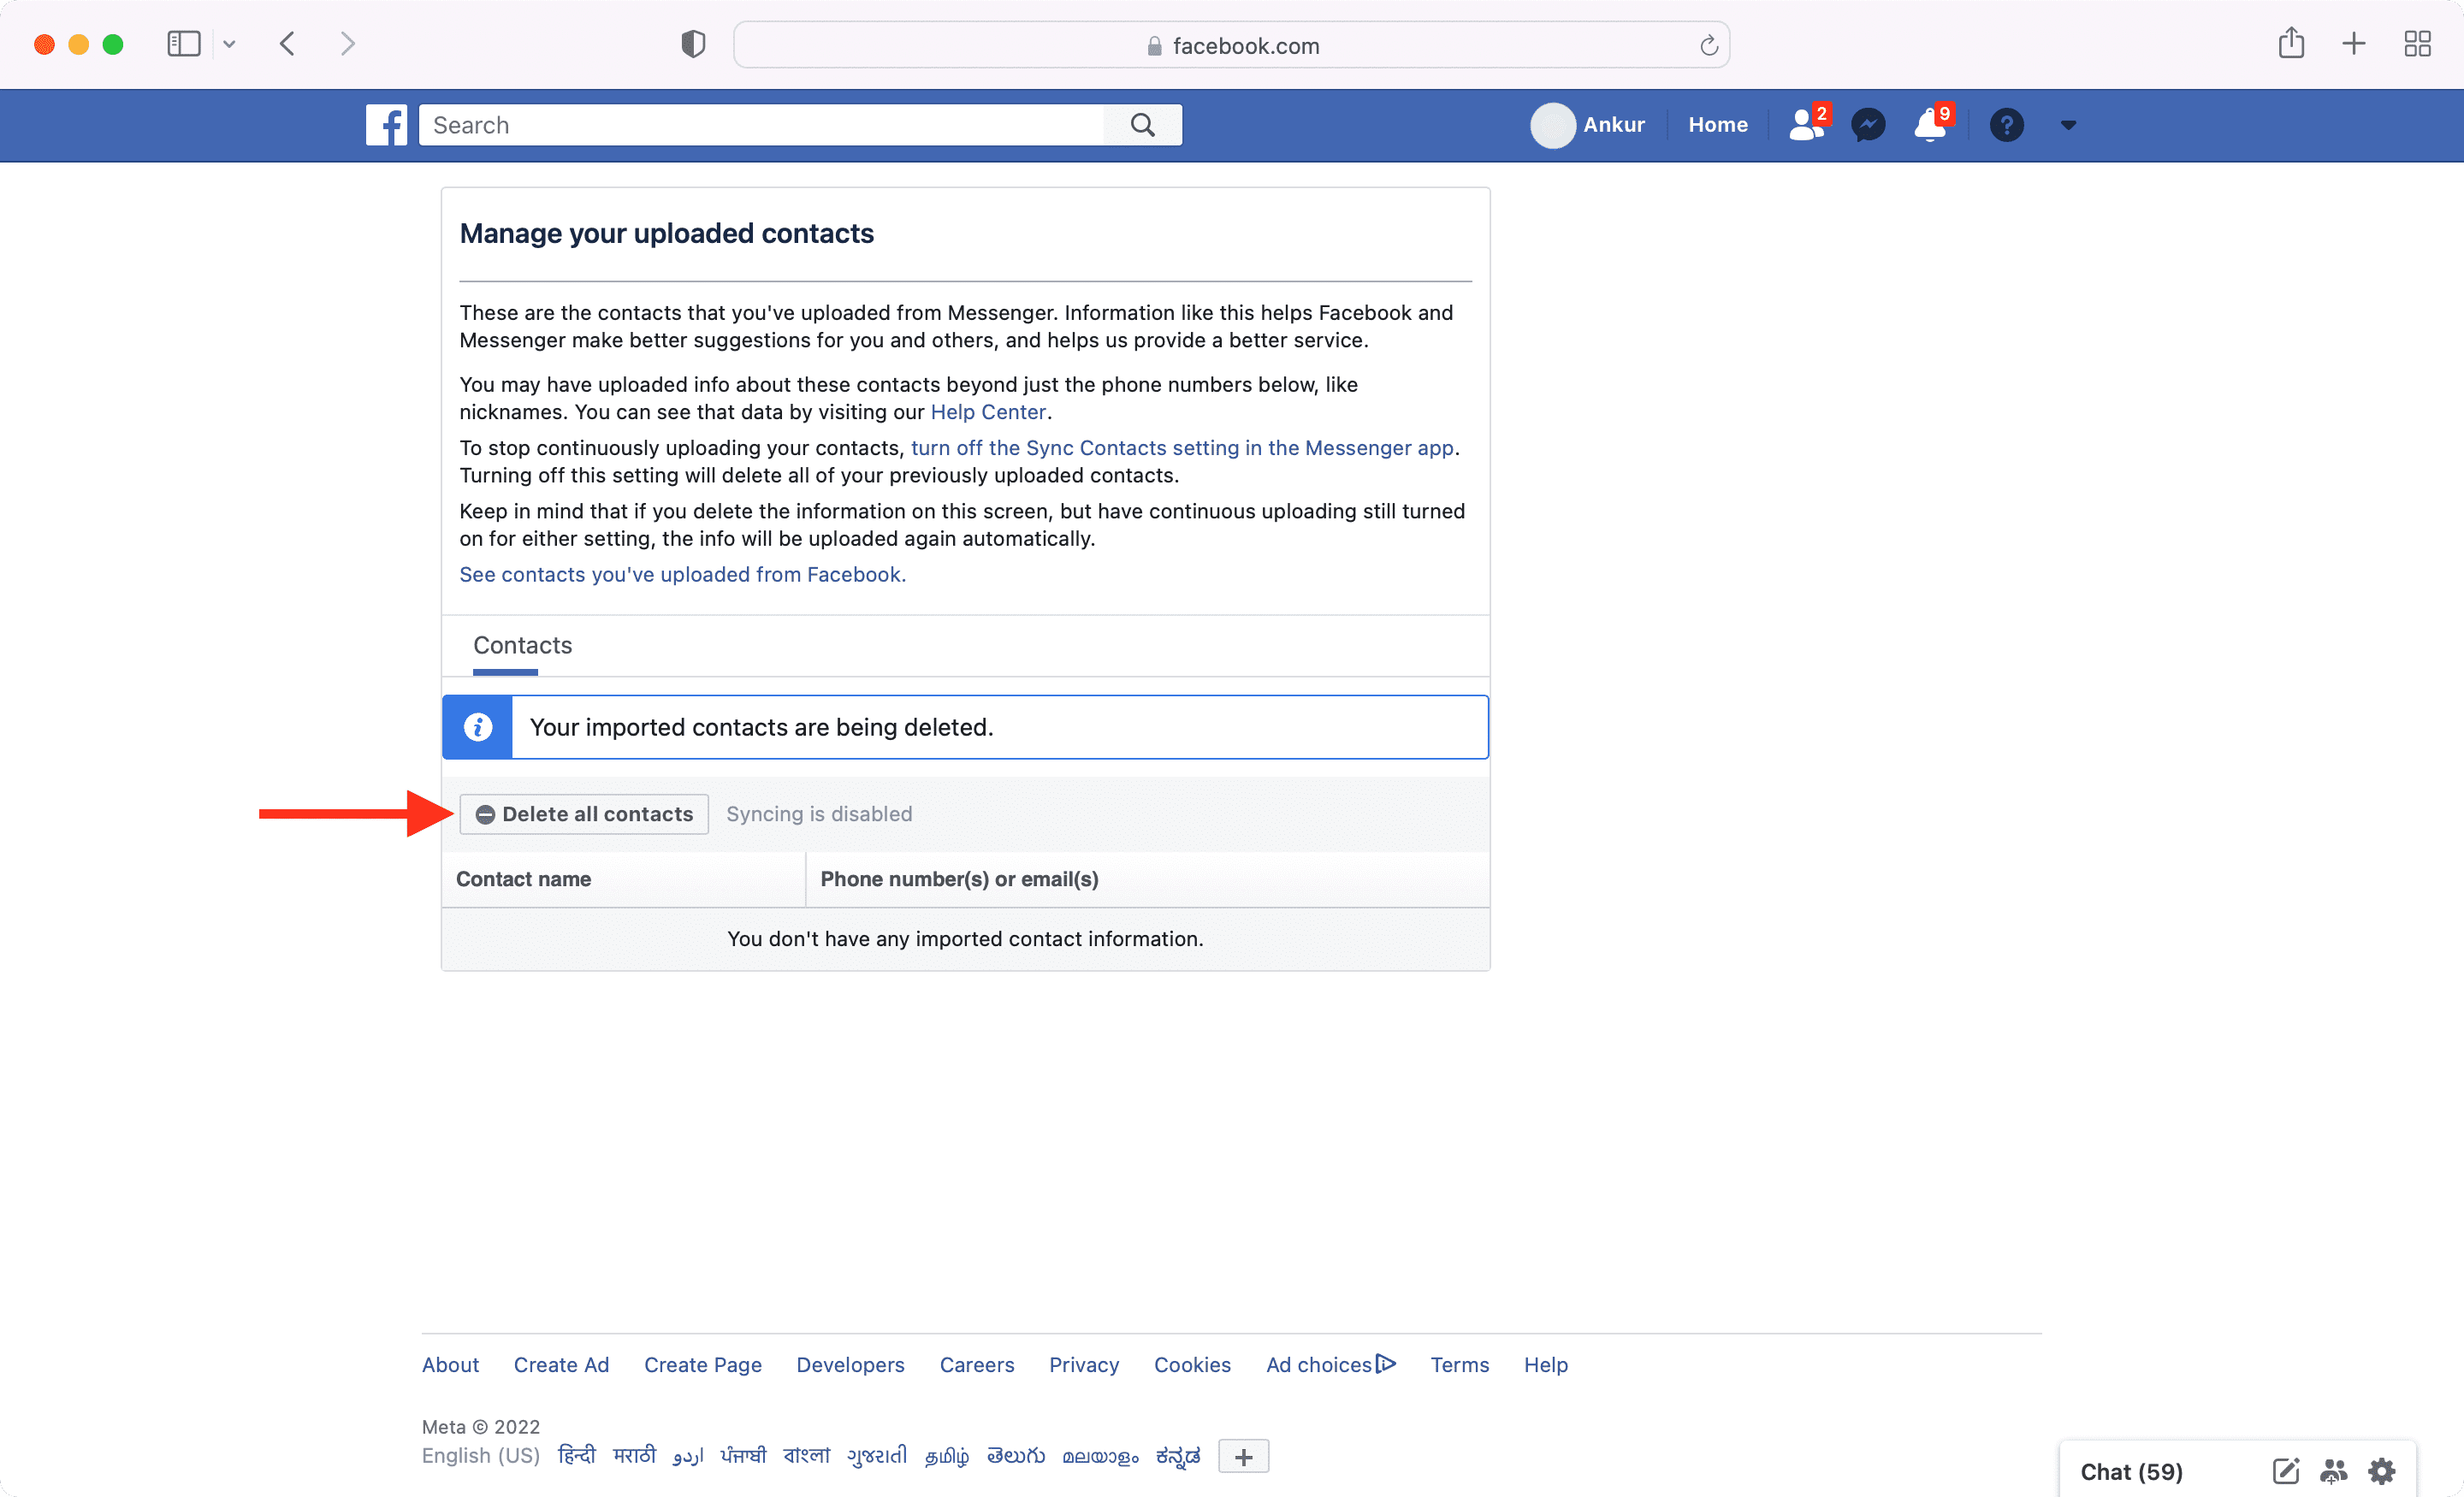 Delete all synced contacts from your Facebook